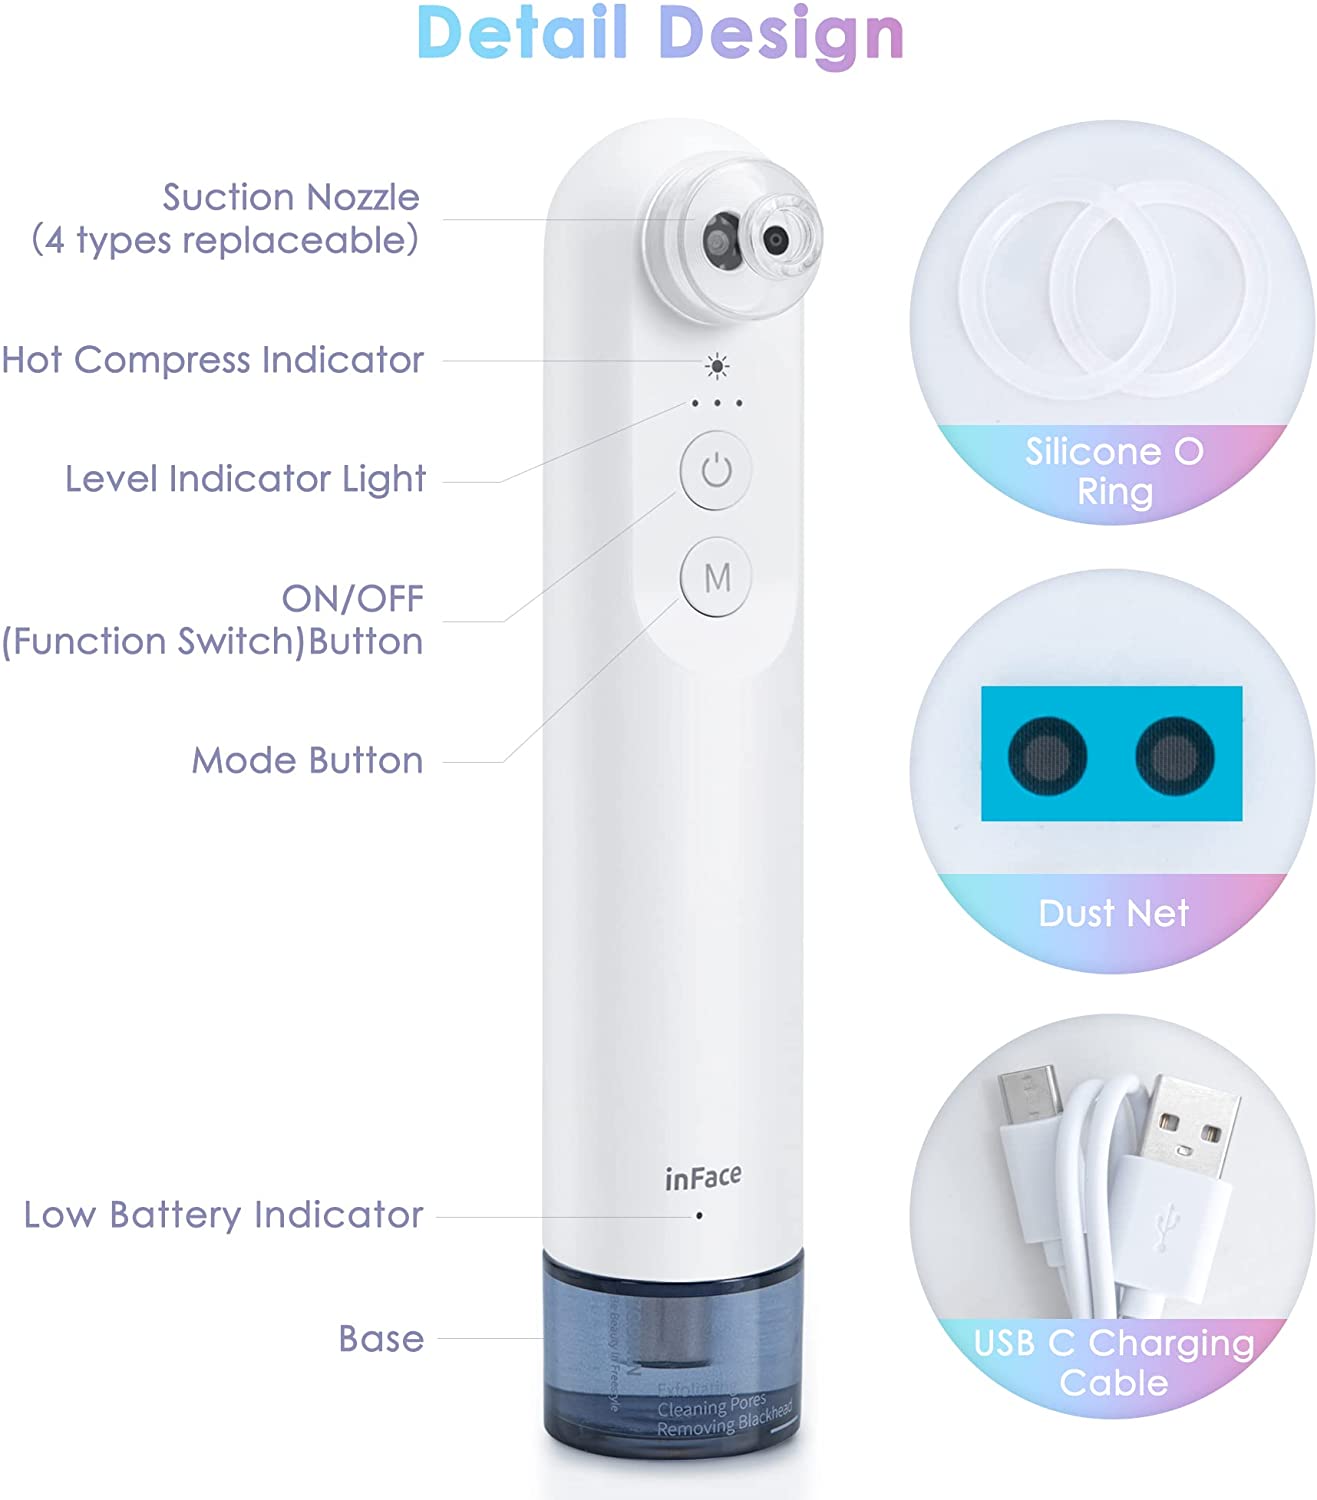 inFace Blackhead Vacuum, WiFi 5.0 Megapixels Visible Facial Pore Cleanser Vacuum with Camera for Blackhead Remover, Electric Blackhead Suction Tool with 5 Suction Heads, Rechargeable